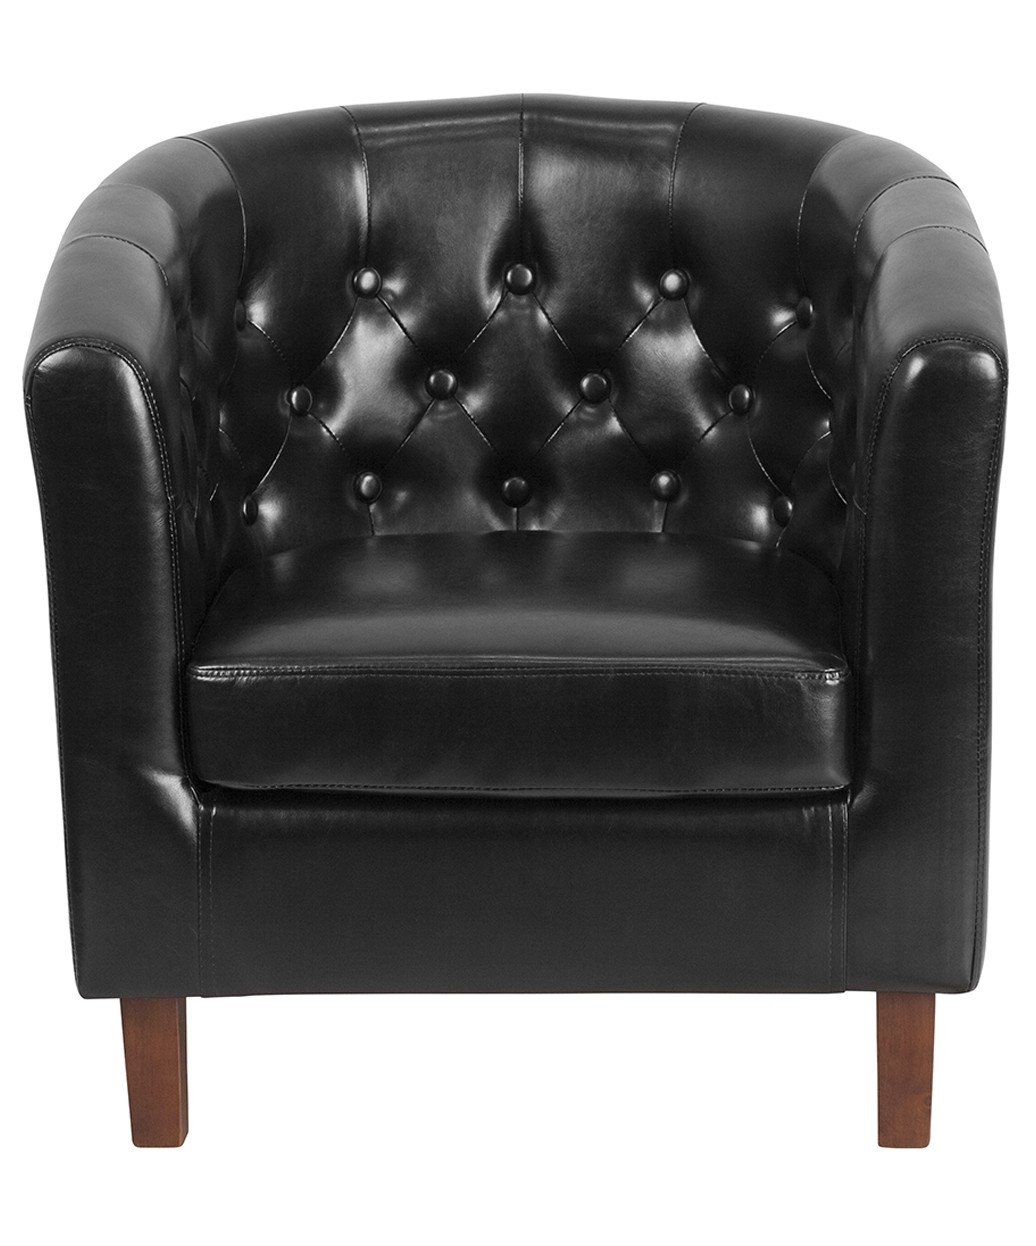 Kensignton Tufted Leather Reception Chair